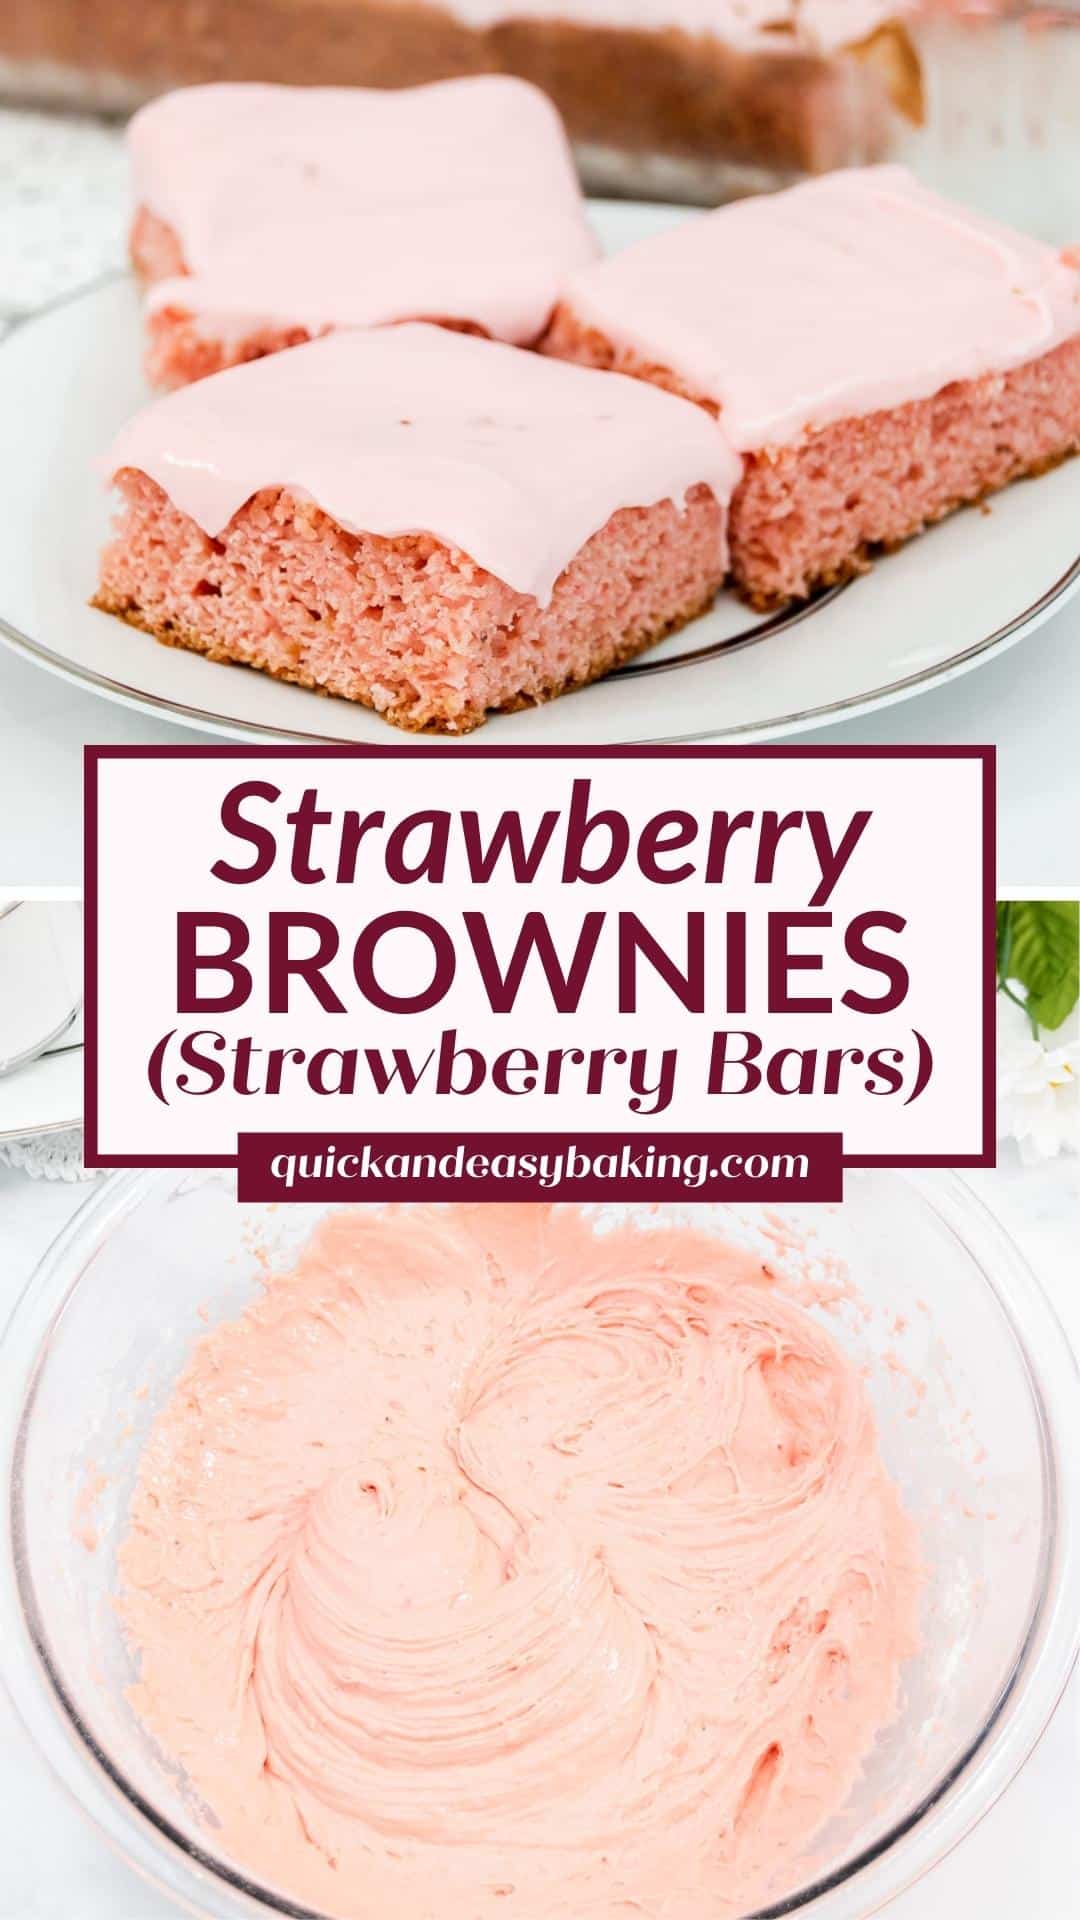 Collage of strawberry bars and text overlay for pinterest graphic.